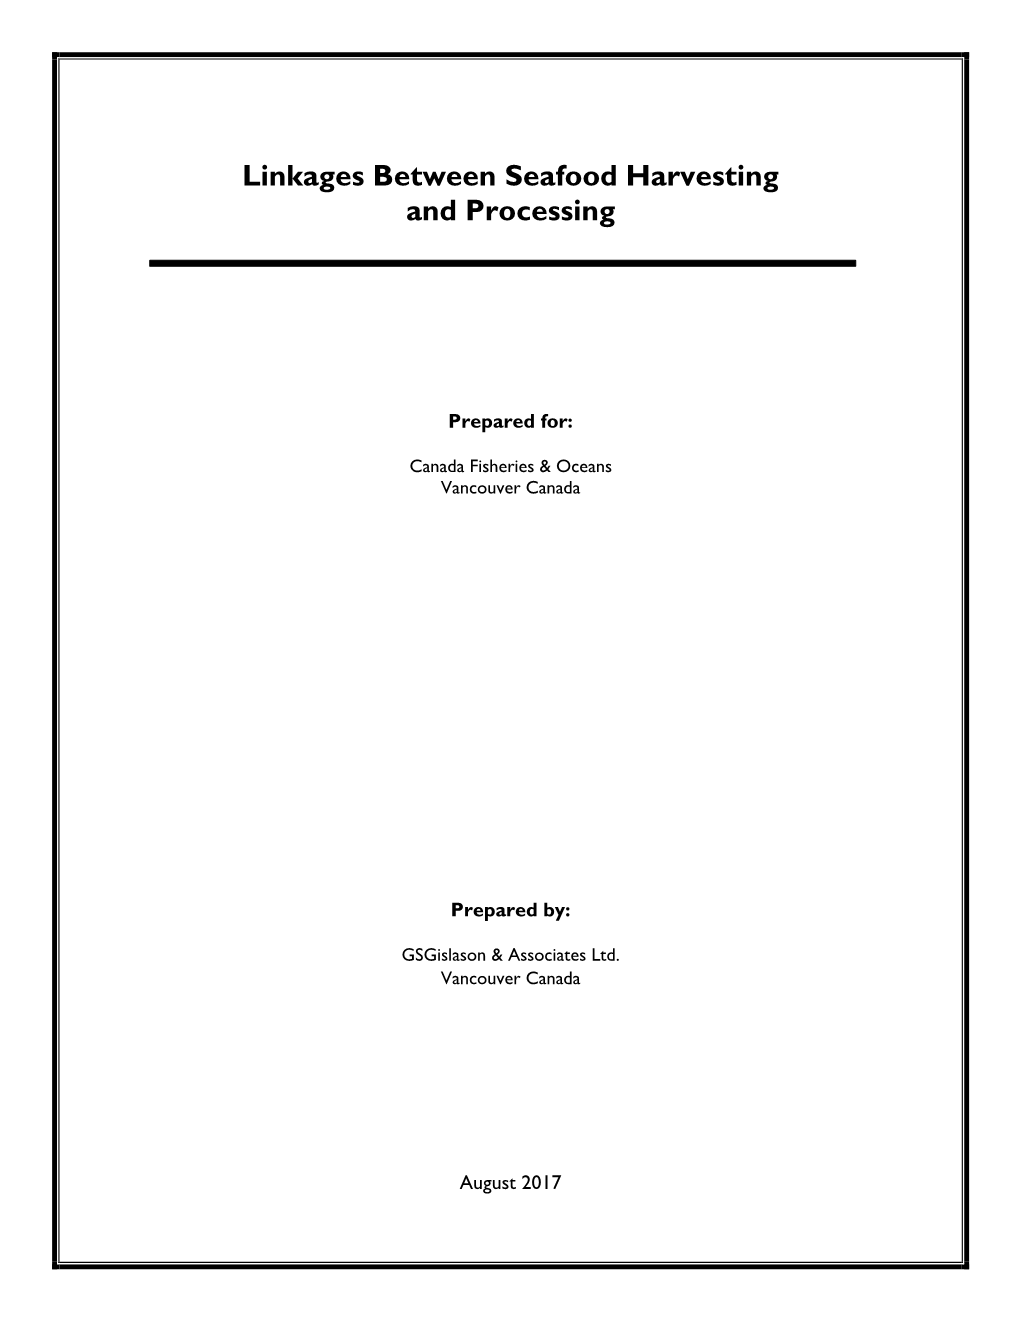 Linkages Between Seafood Harvesting and Processing